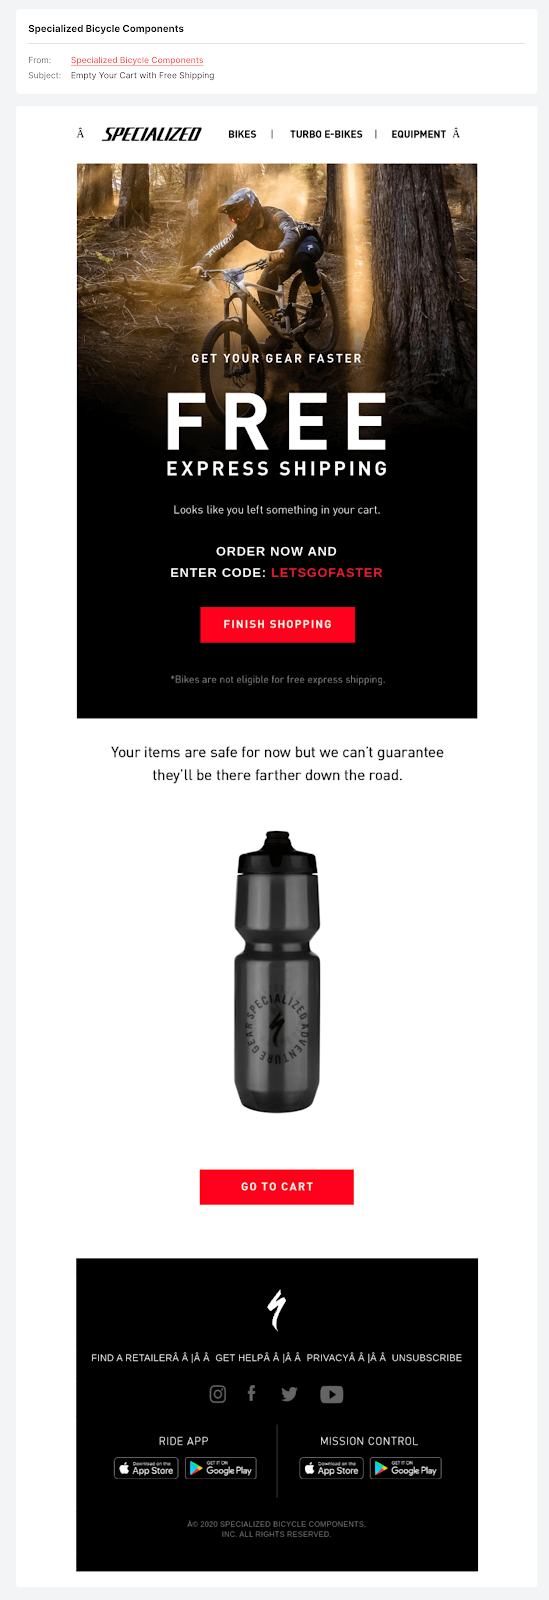 screenshot of specialized bicycles winback email